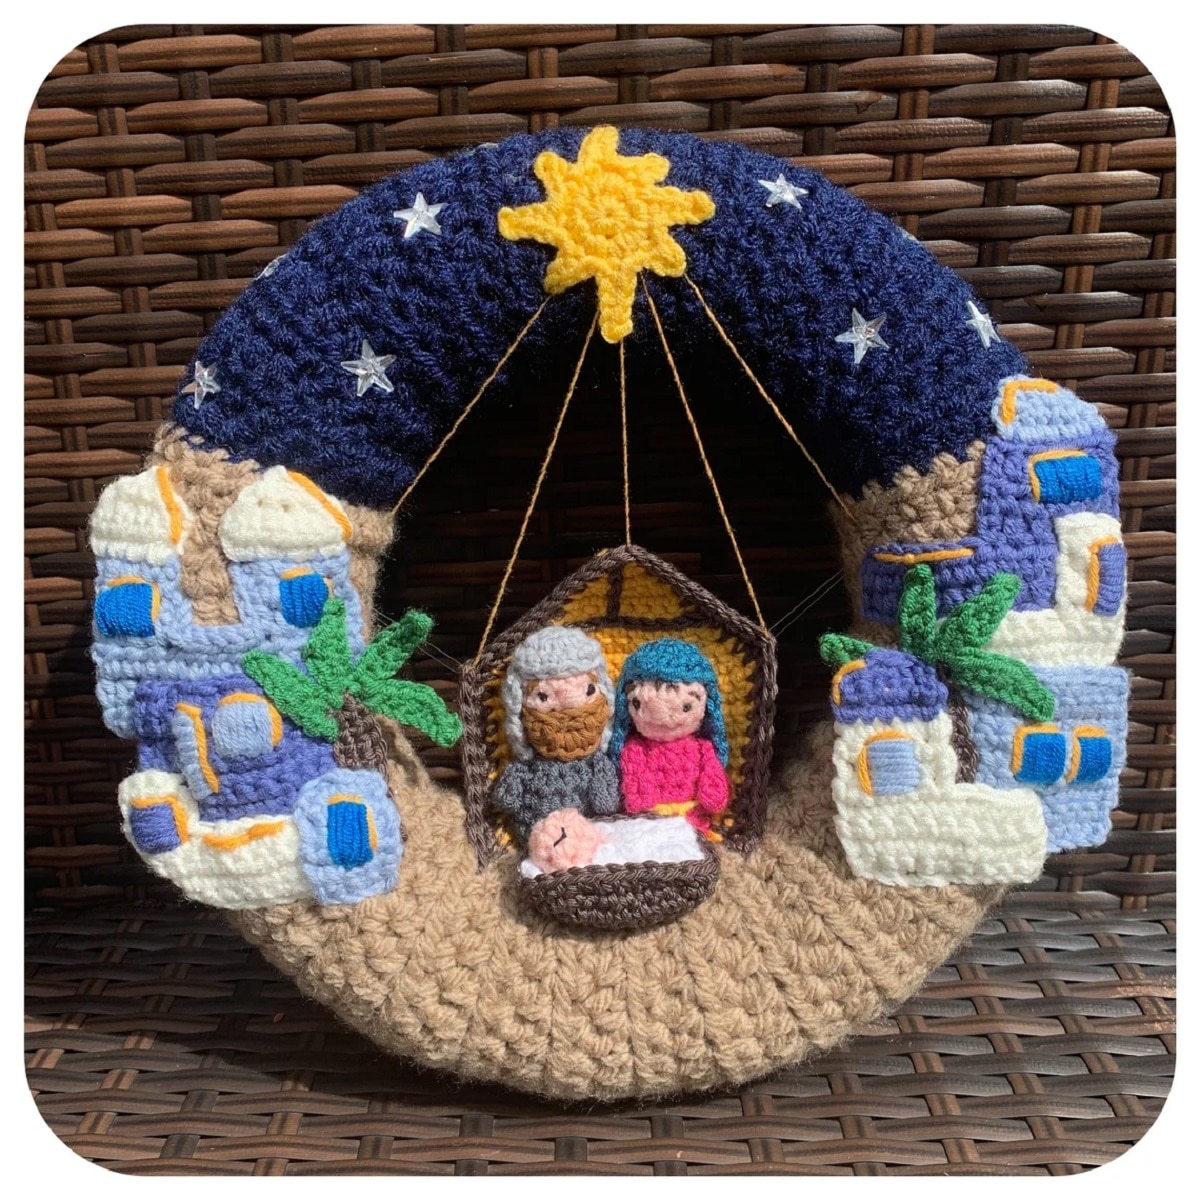 A crochet wreath with a blue night sky and yellow star in the center, Bethlehem on the side, and Mary, Joseph and Jesus in the center.